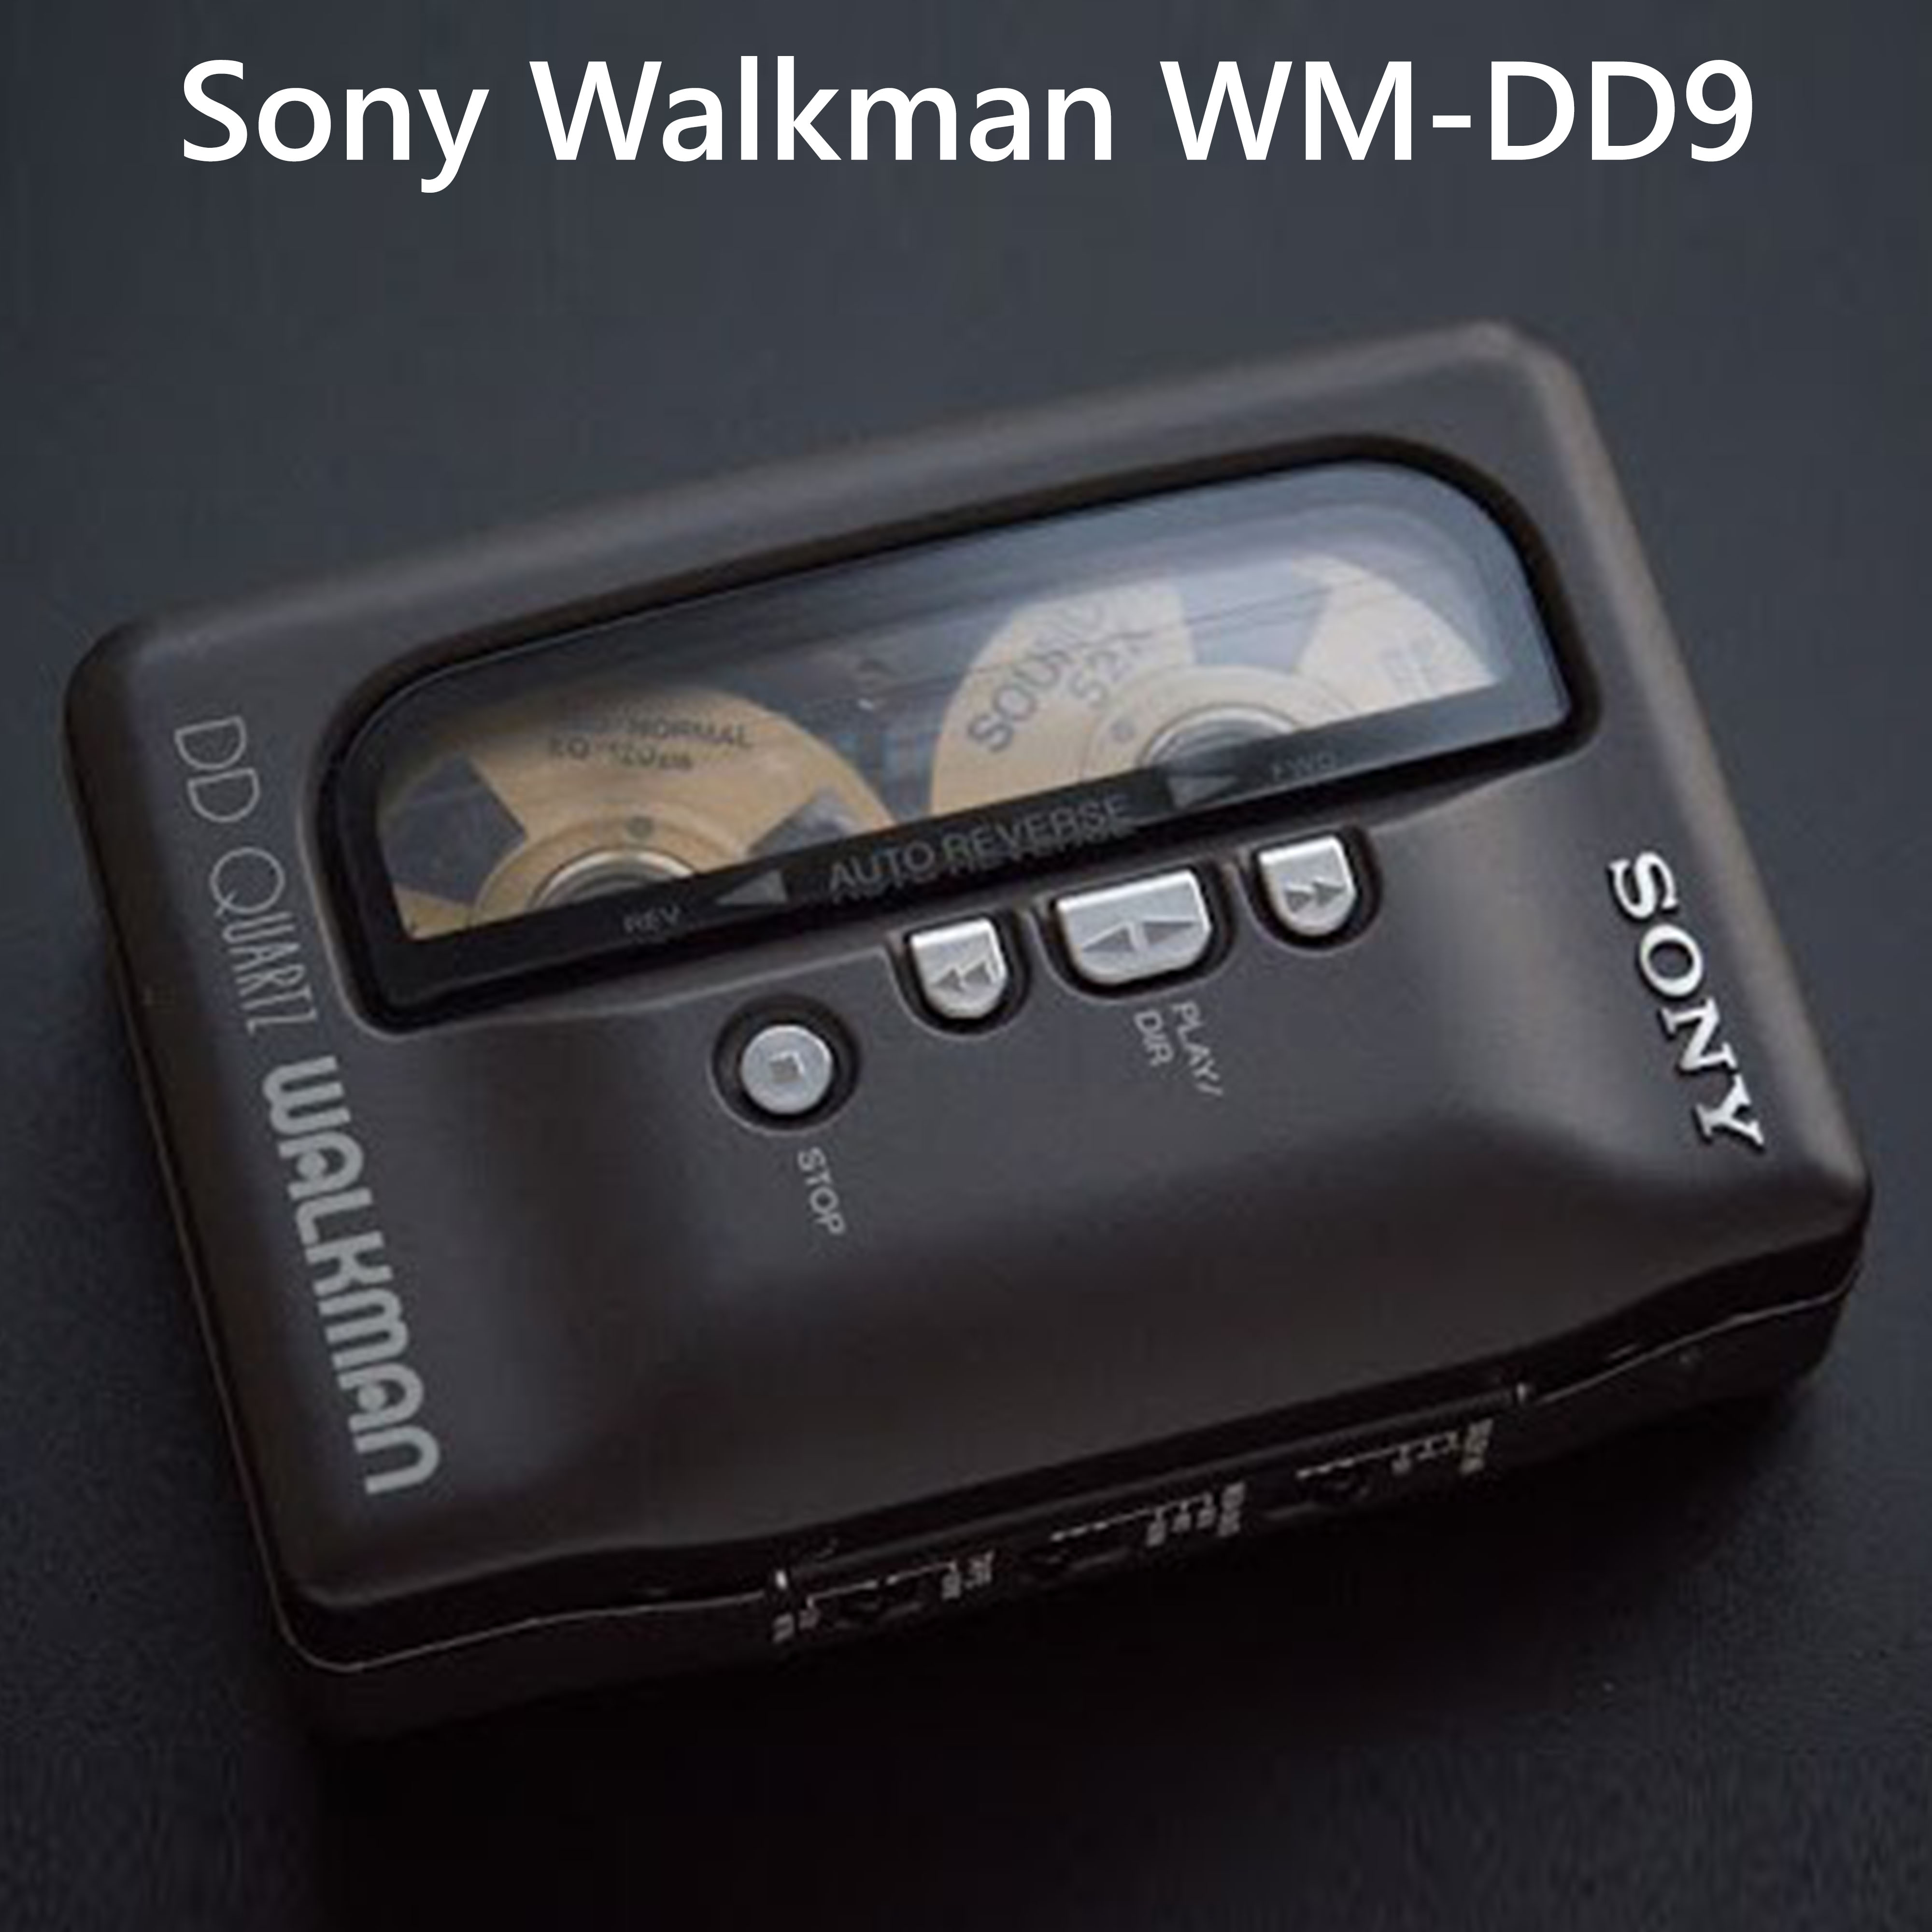 Sony Walkman WM-DD9 Very RARE Cassette Player EXCELLENT condition (Serial  Number S/N 55416)